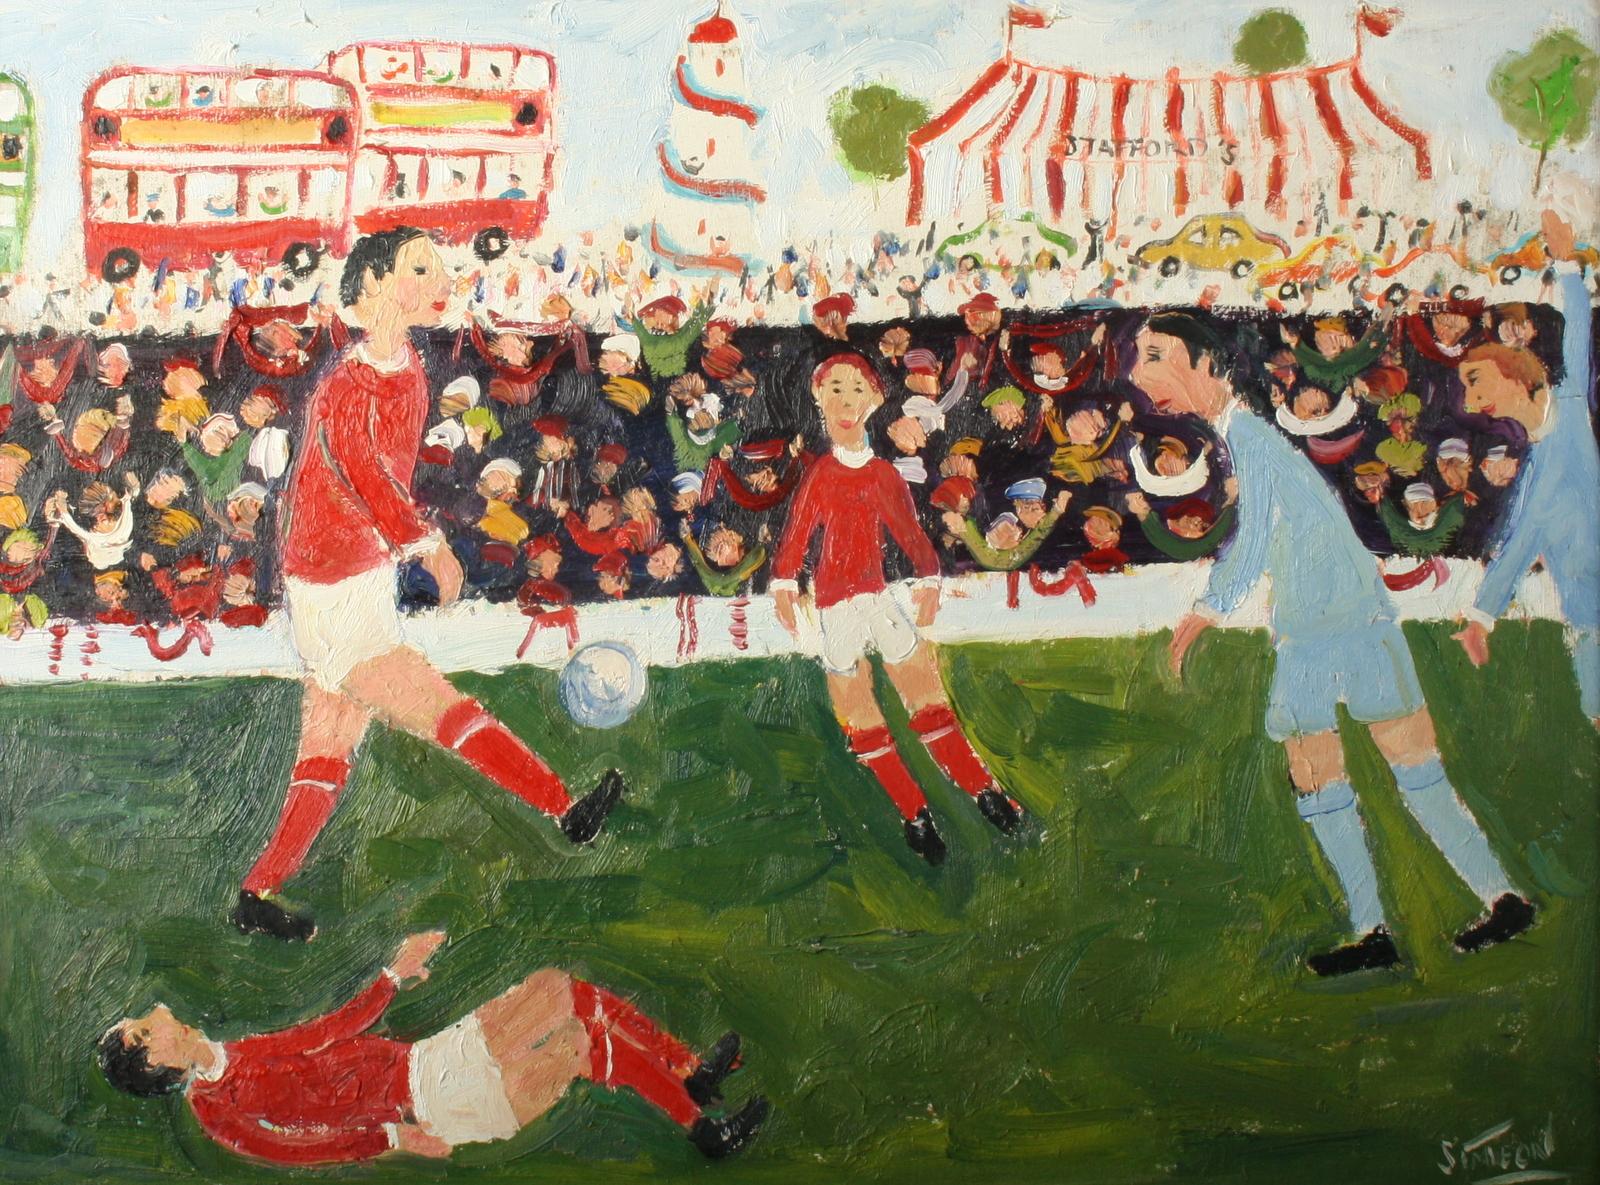 Simeon Stafford Figurative Painting - "The Derby - Manchester United v Manchester City"